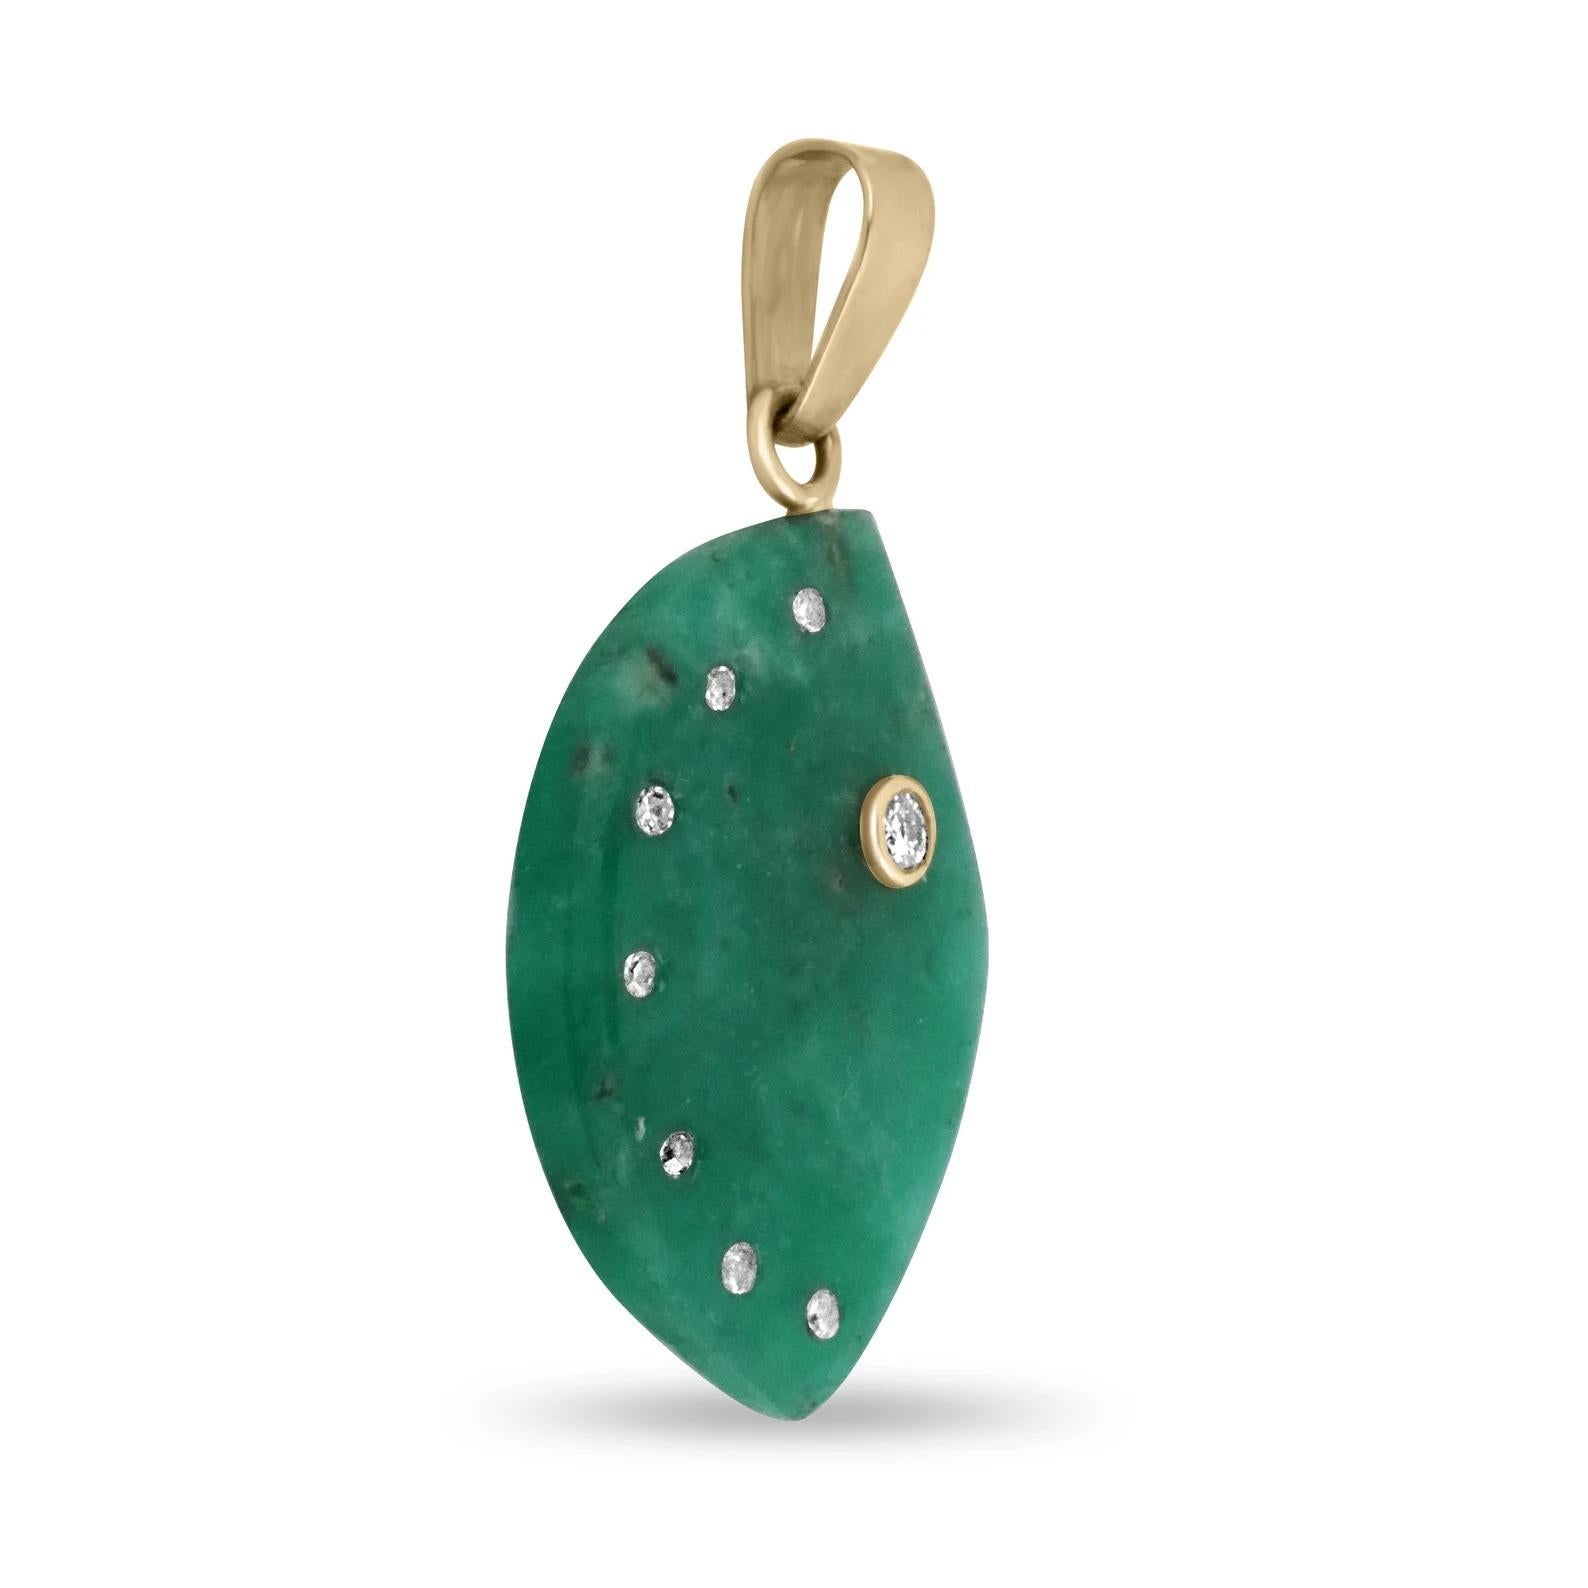 Displayed is our most unique Colombian emerald slice and diamond accents pendant. A natural, emerald slab is encrusted by brilliant round diamonds, accented with a 14k gold bale. The emerald is earth-mined and showcases beautiful medium green color.